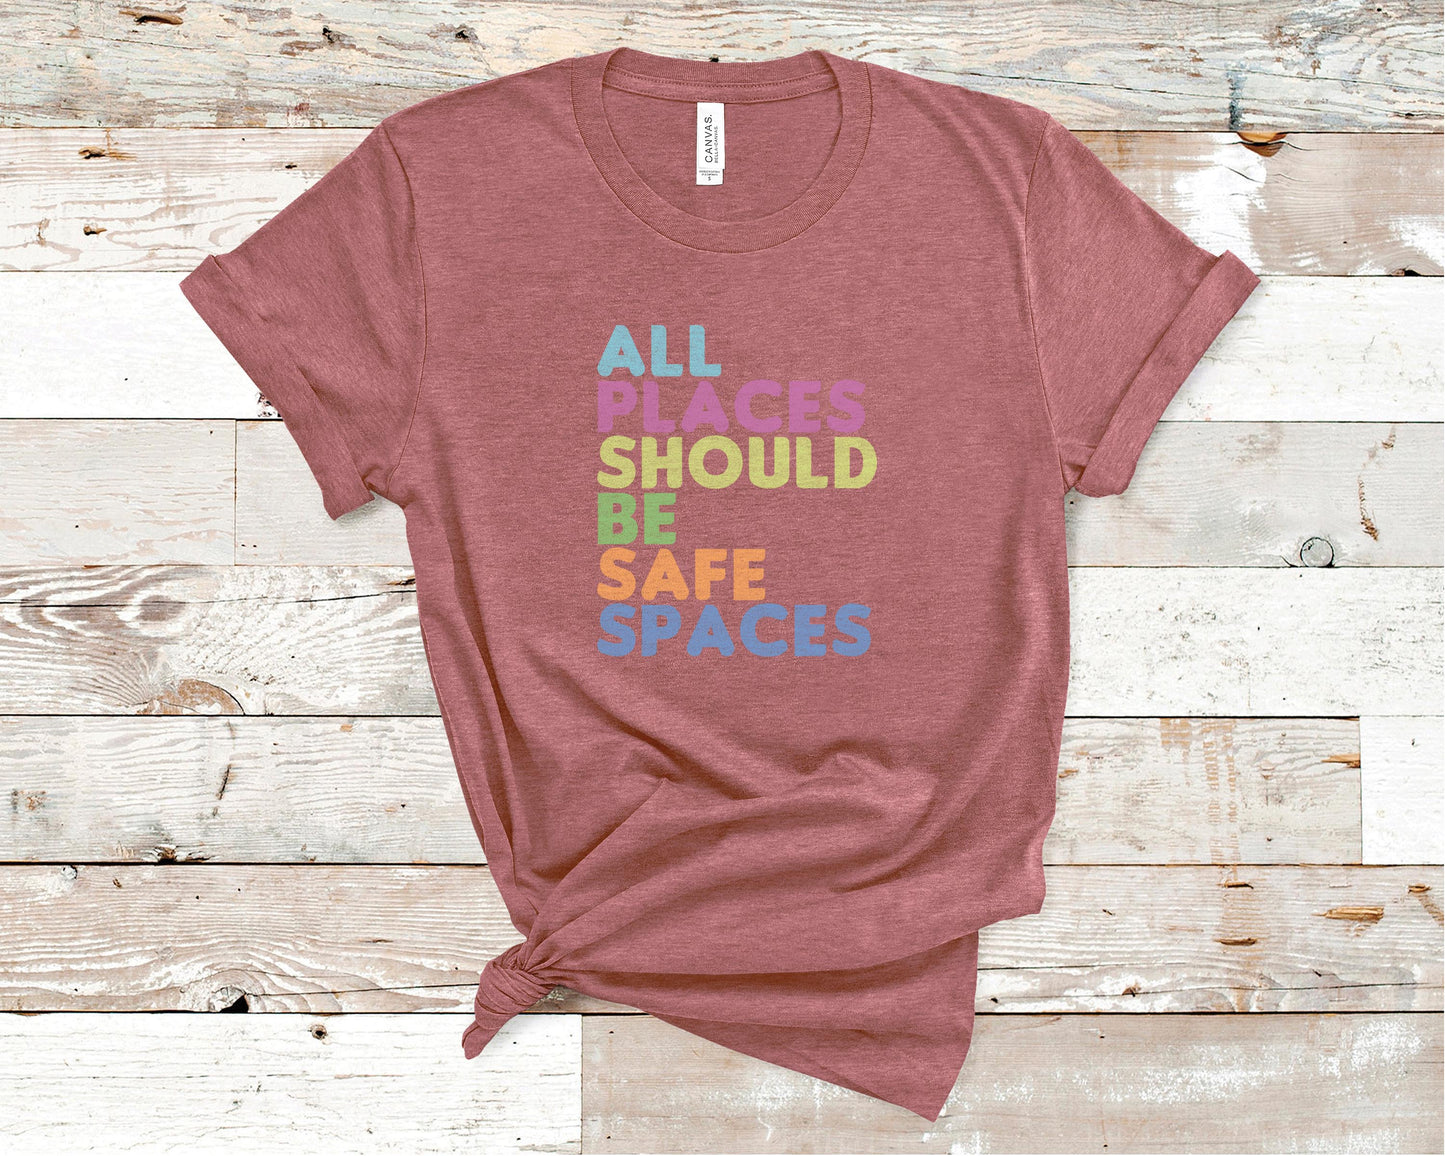 All Places Should Be Safe Spaces - LGBTQ